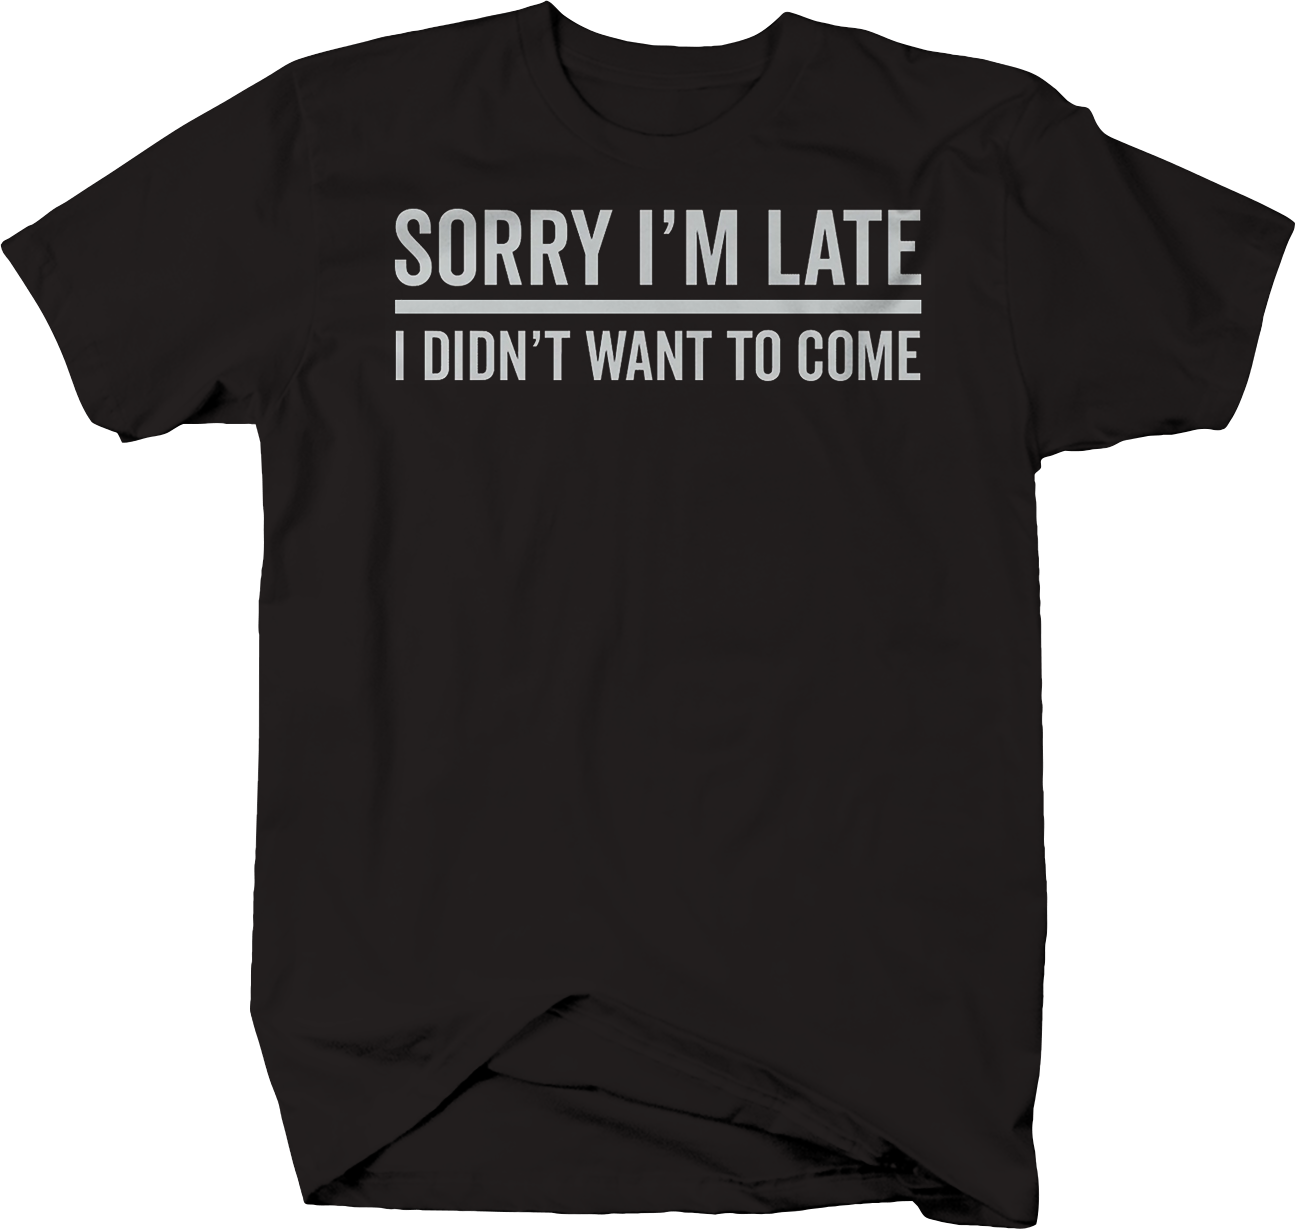 sorry im late i didnt want to come T-Shirt for men XLarge Black - image 1 of 2